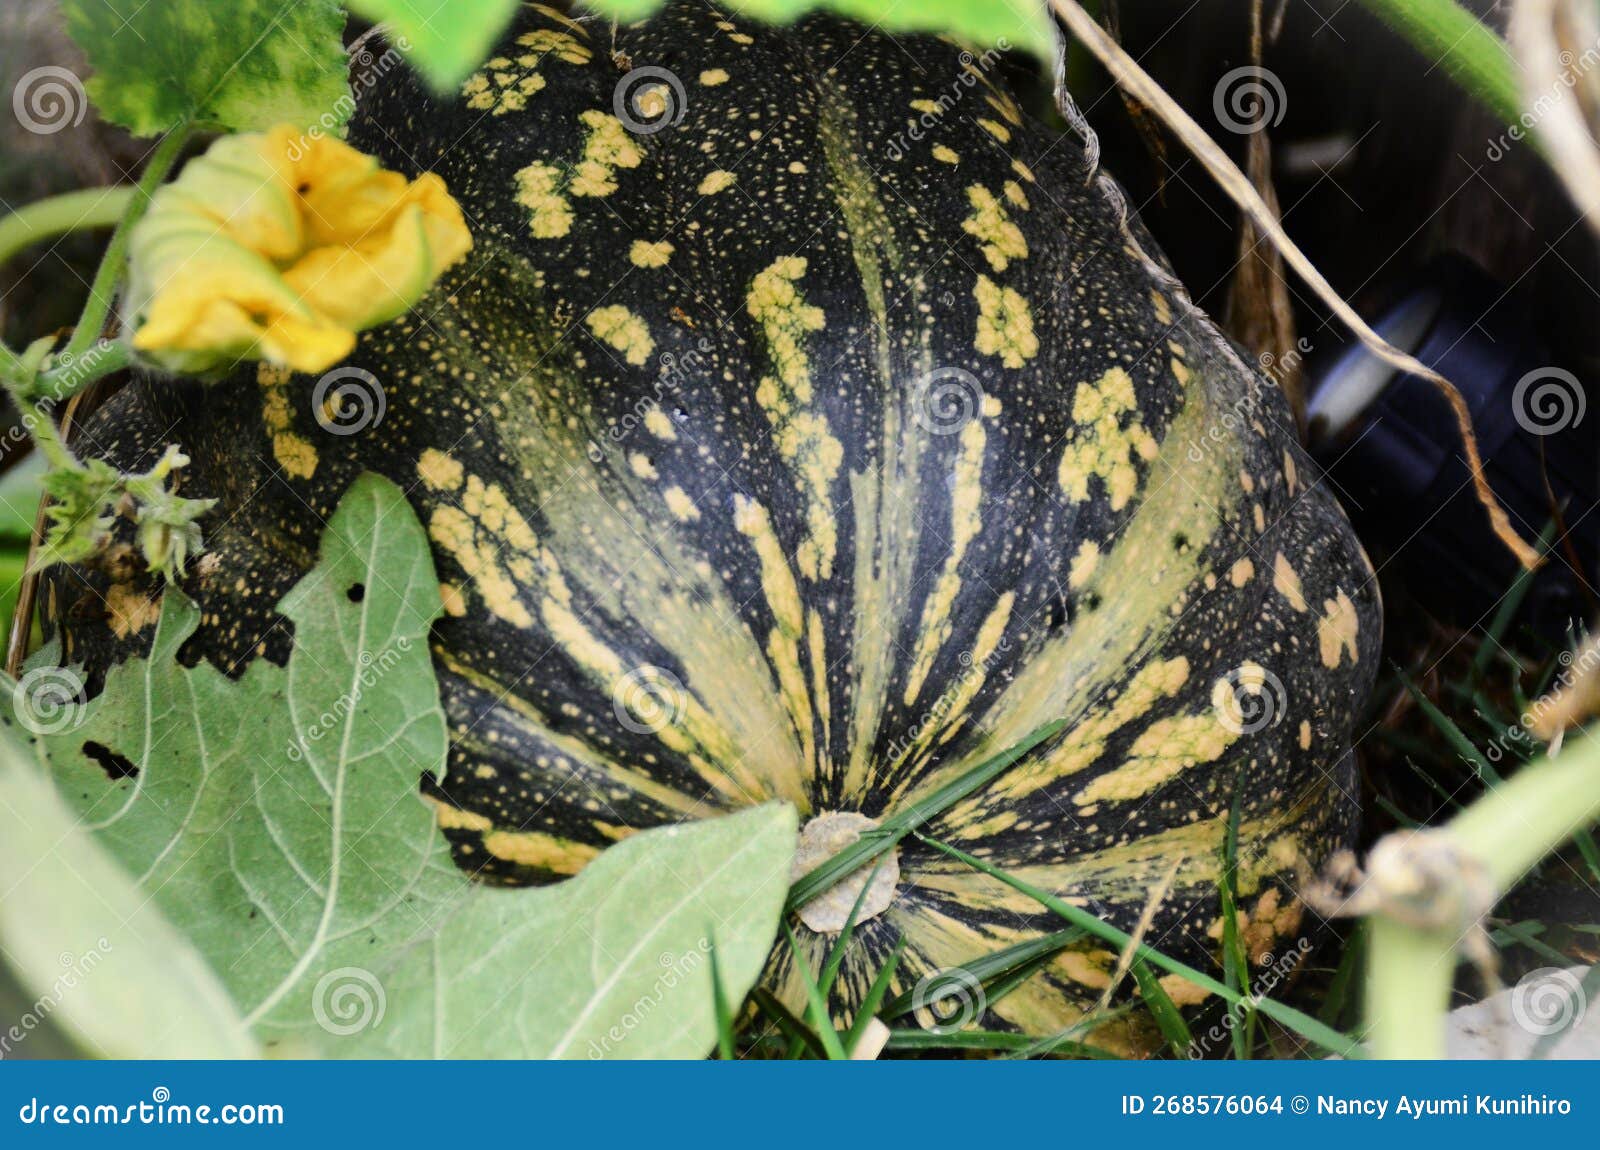 an alligator pumpkin growing amidst its leaves